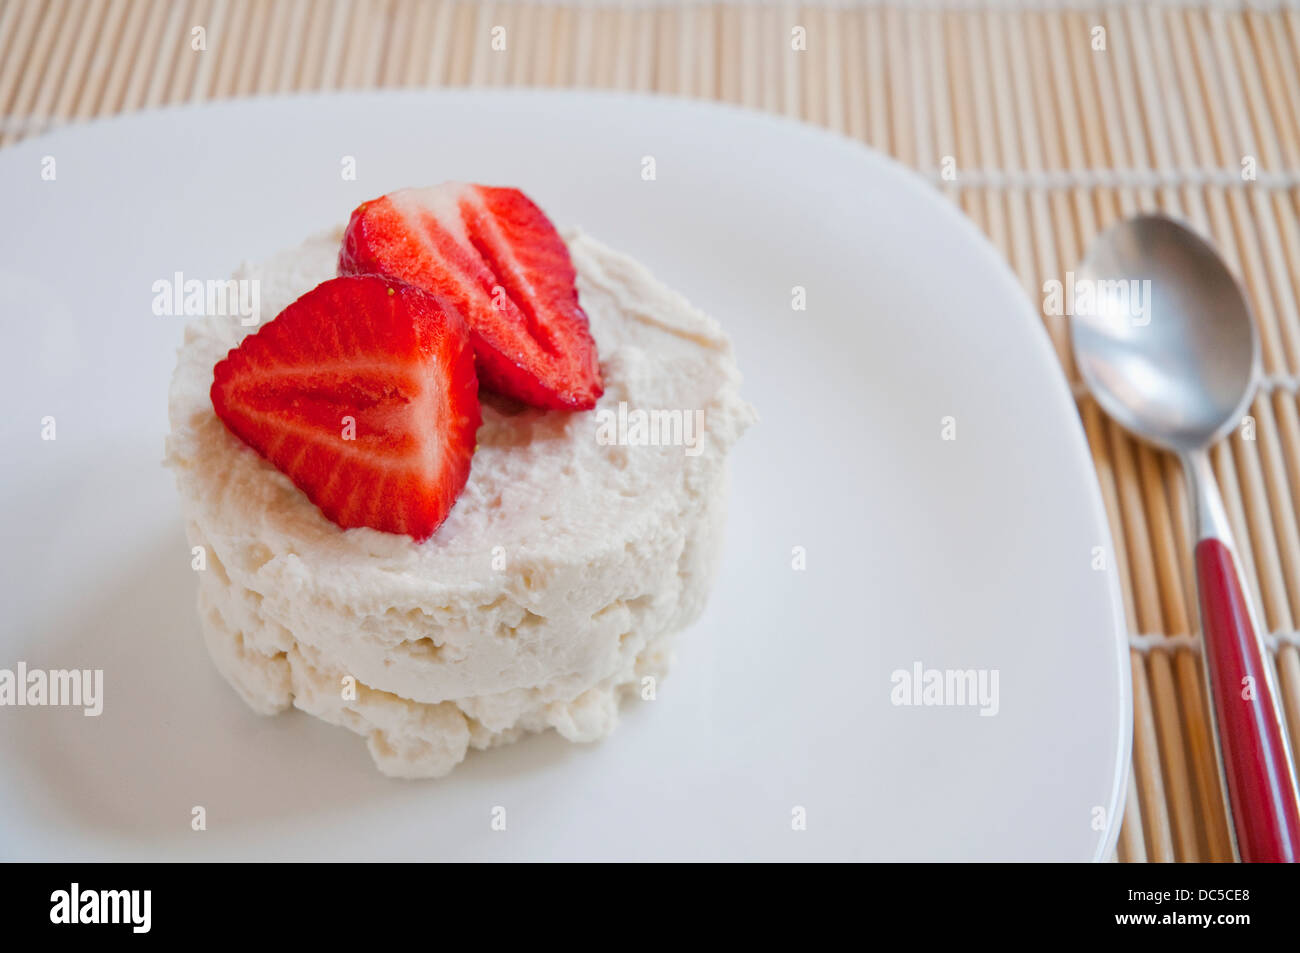 Curd cheese with strawberry. Close view. Stock Photo